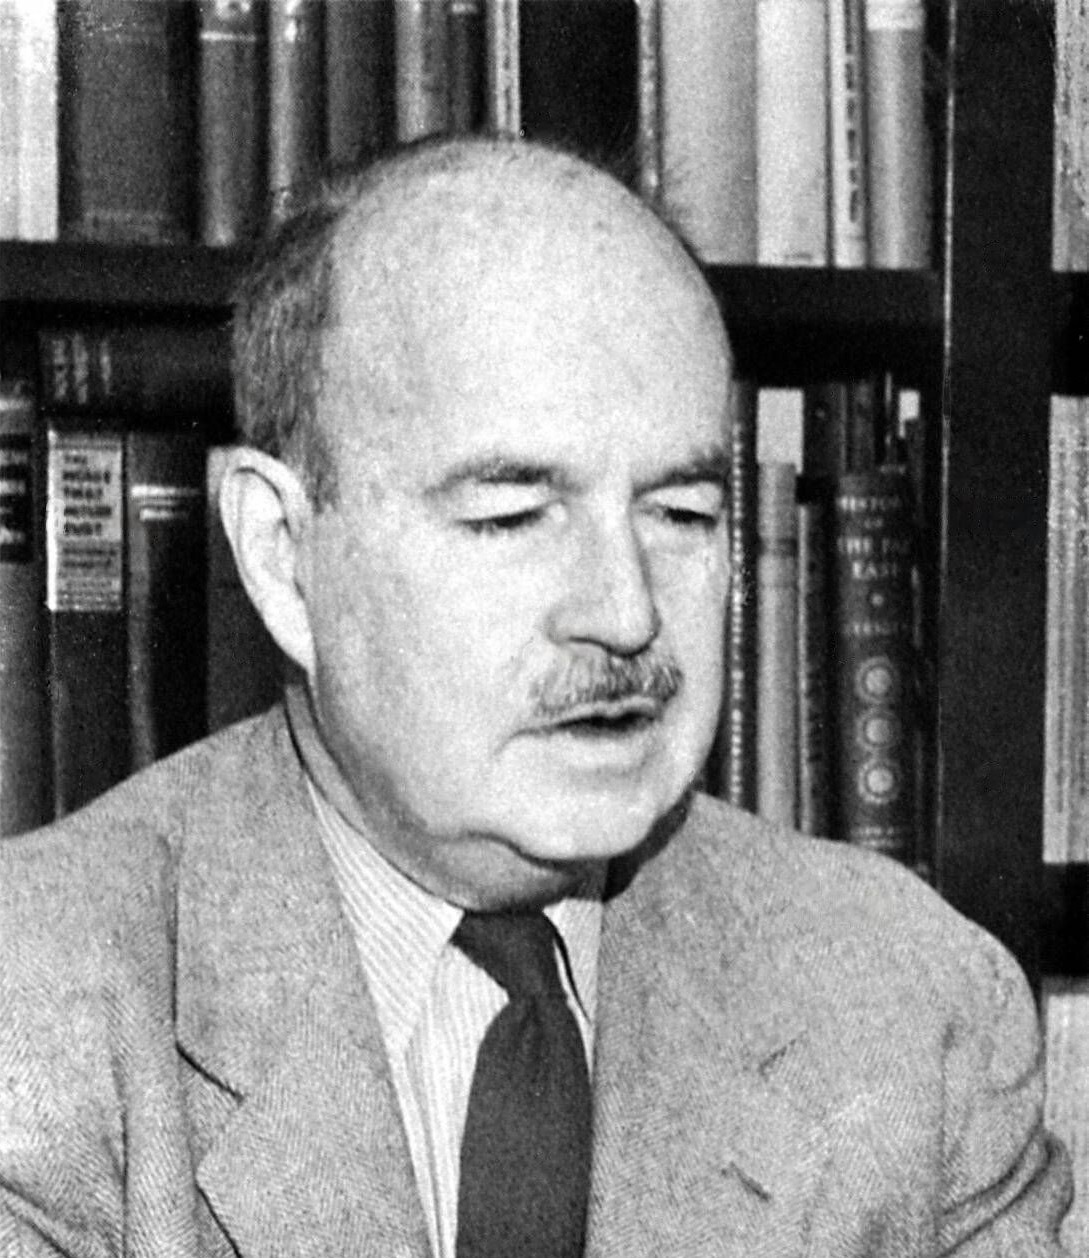 Who is Talcott Parsons?